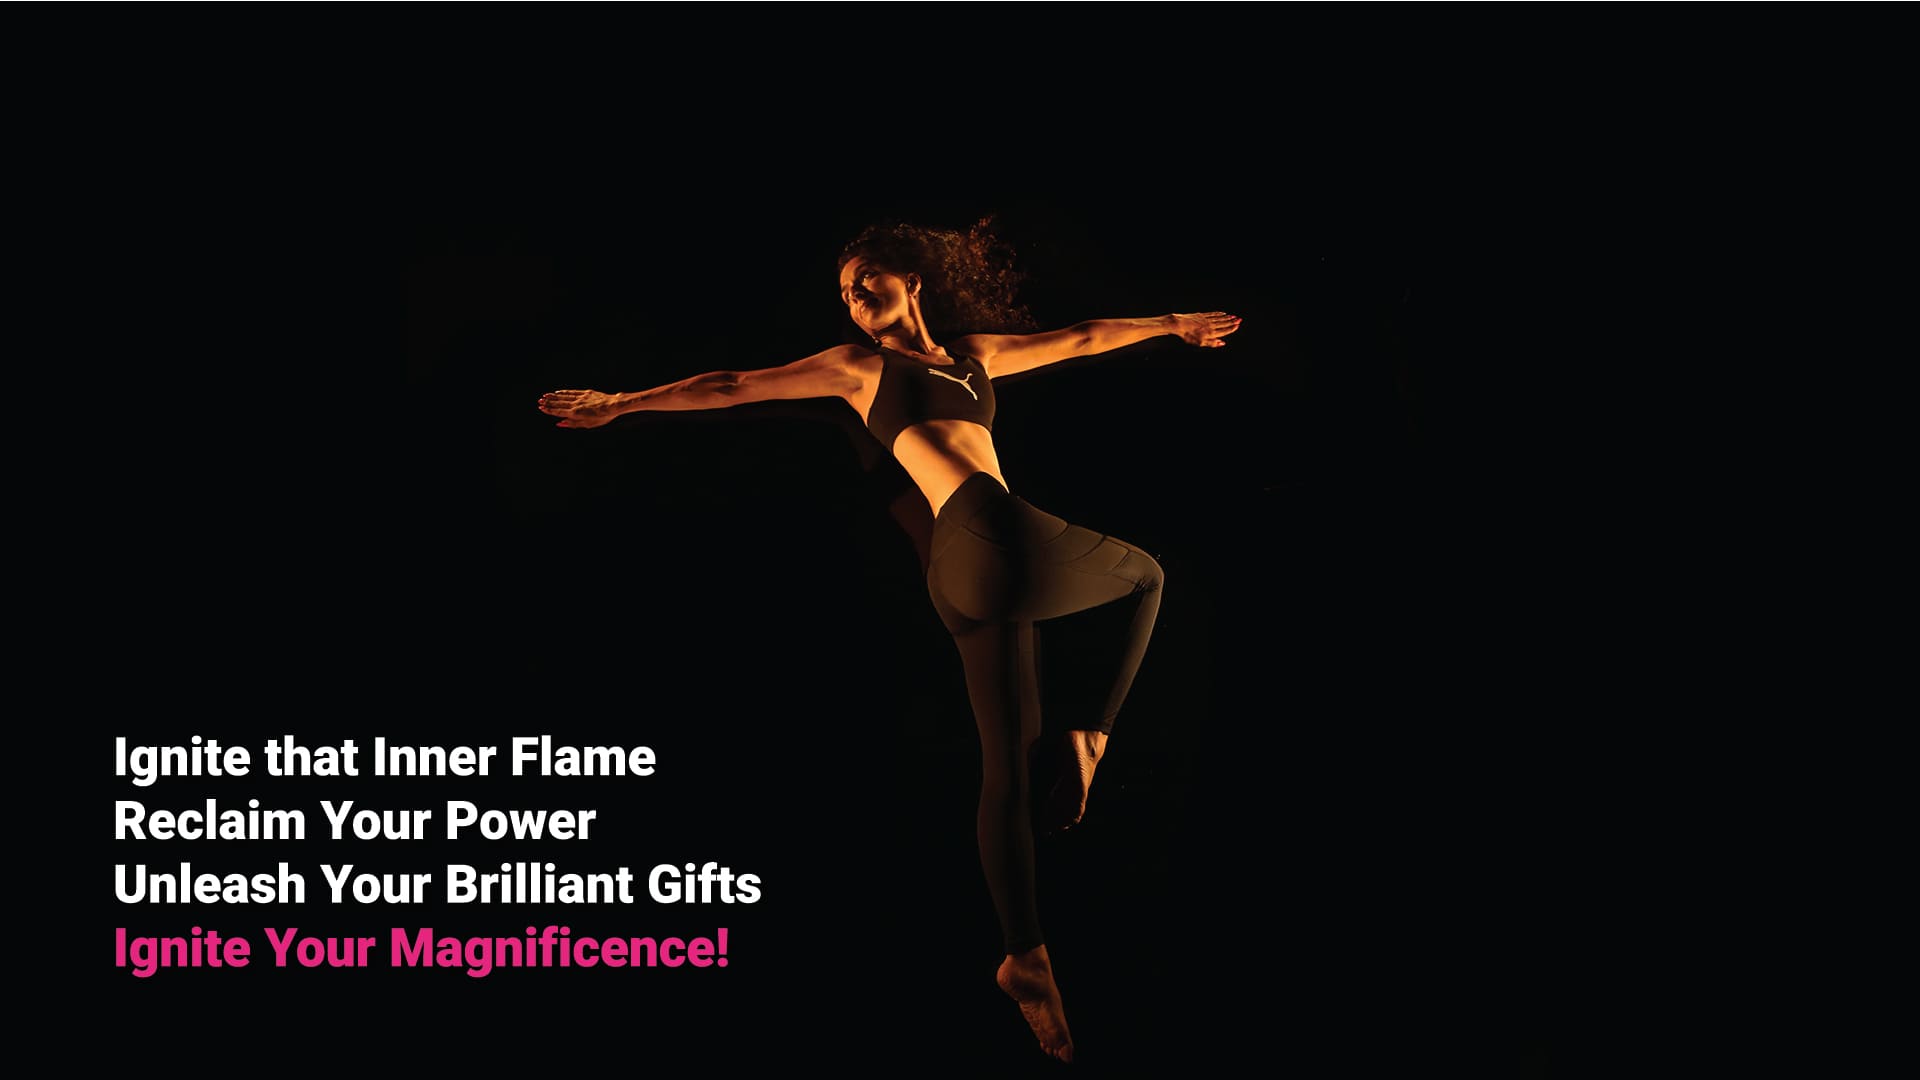 Ignite that Inner Flame. Reclaim Your Power. Unleash Your Brilliant Gifts. Ignite Your Magnificence!